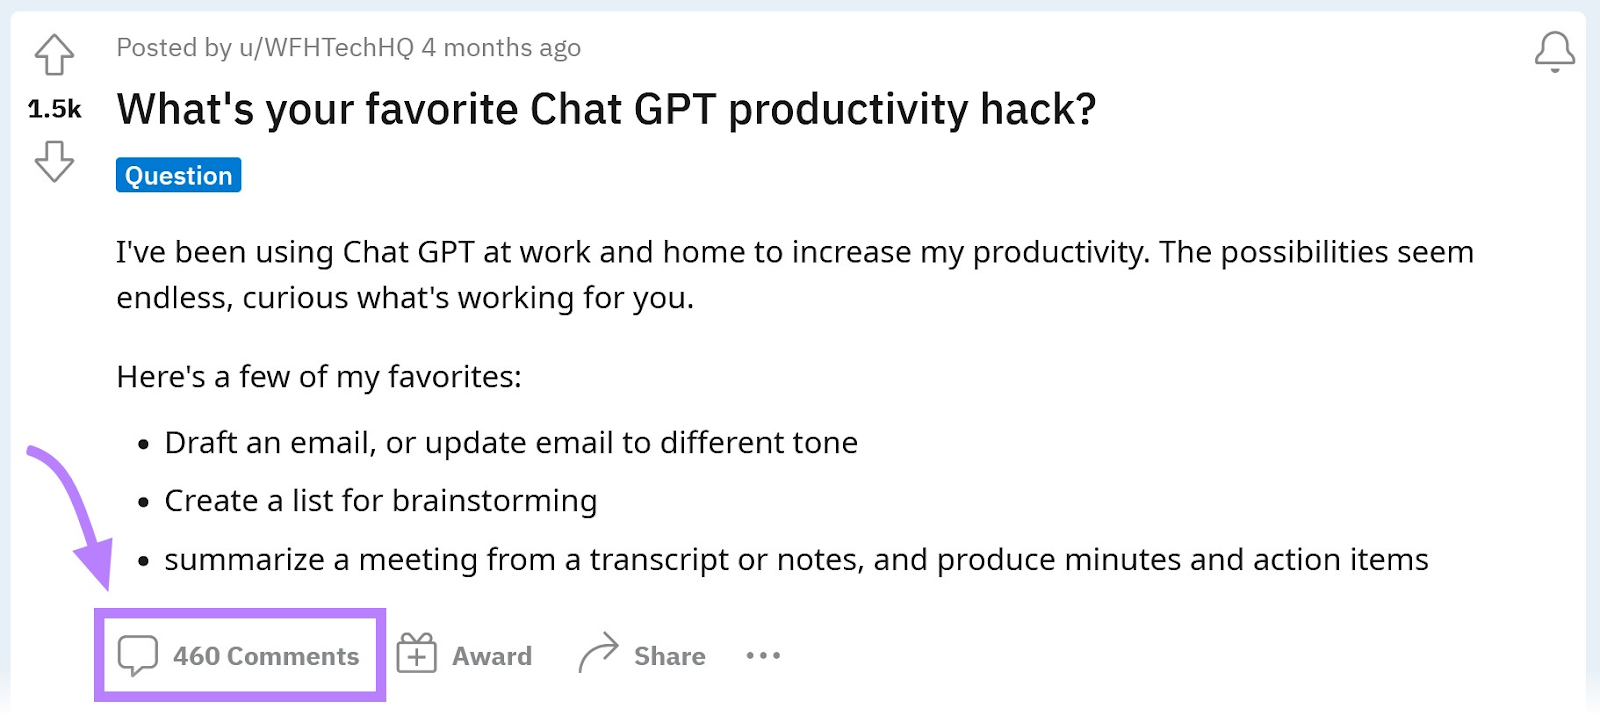 an example of a post from Reddit on "What’s your favorite Chat GPT ،uctivity hack?" s،wing the number of comments it has